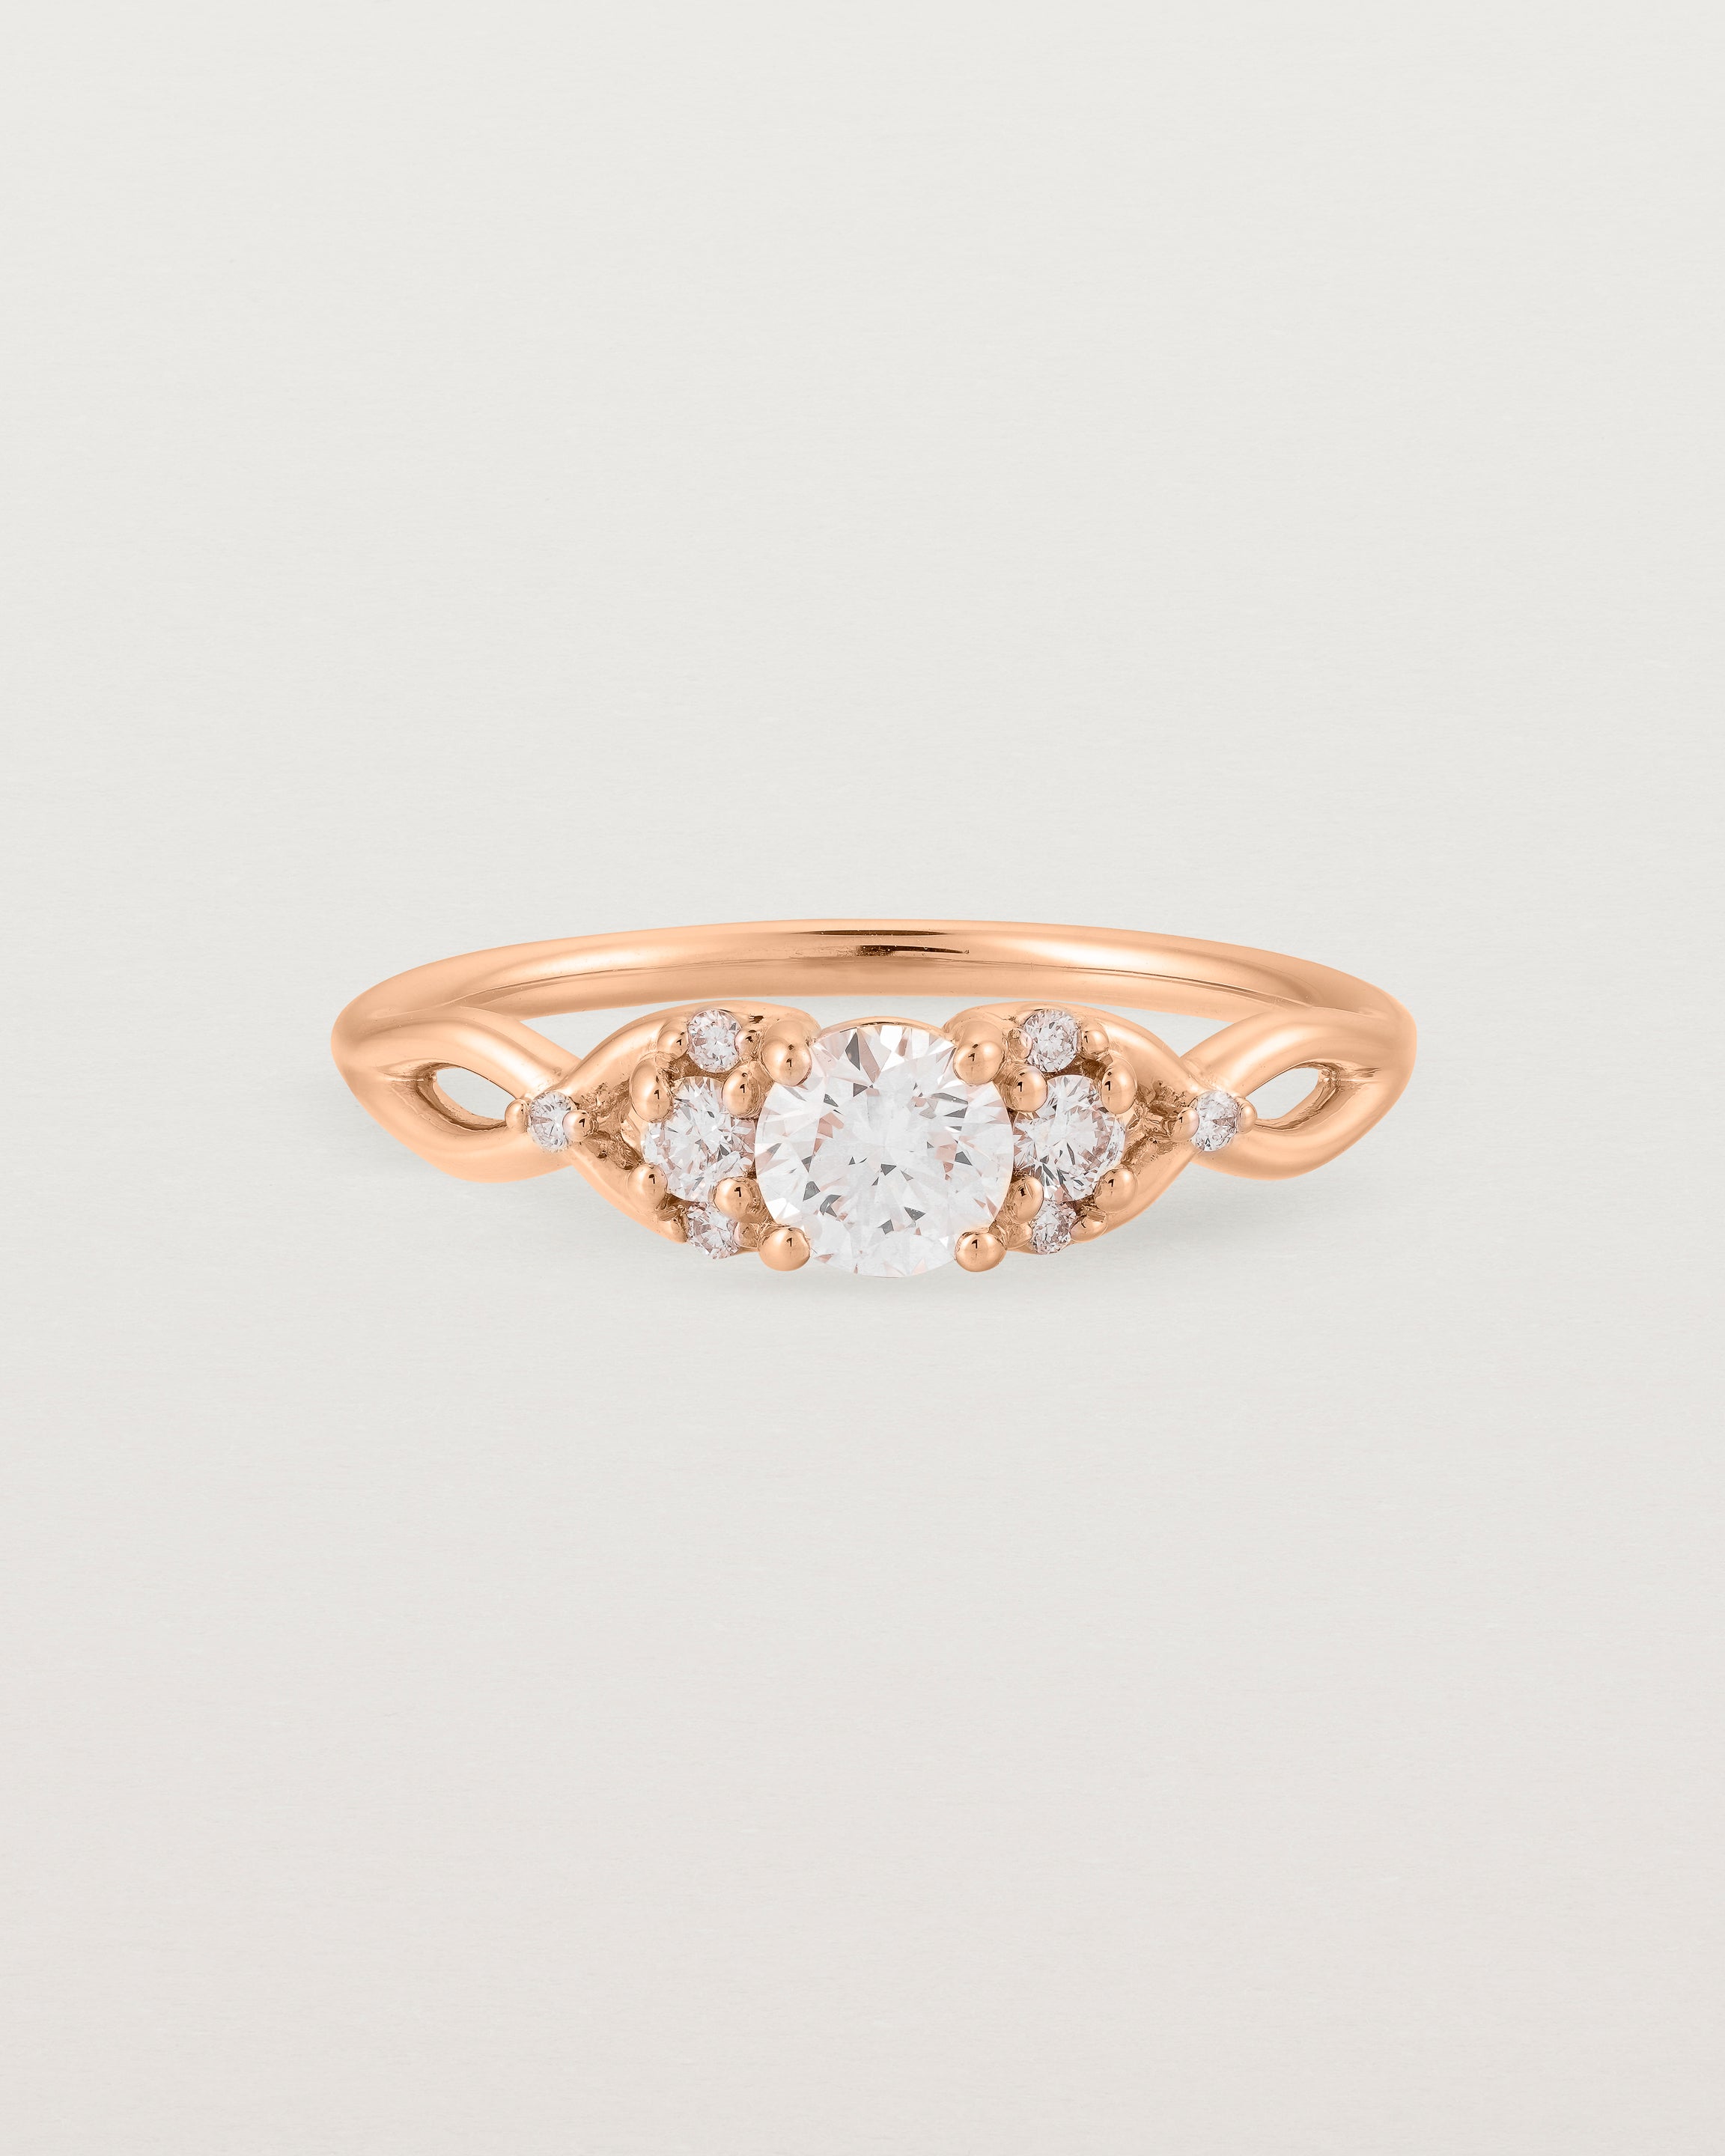 A vintage inspired rose gold ring featuring white diamonds